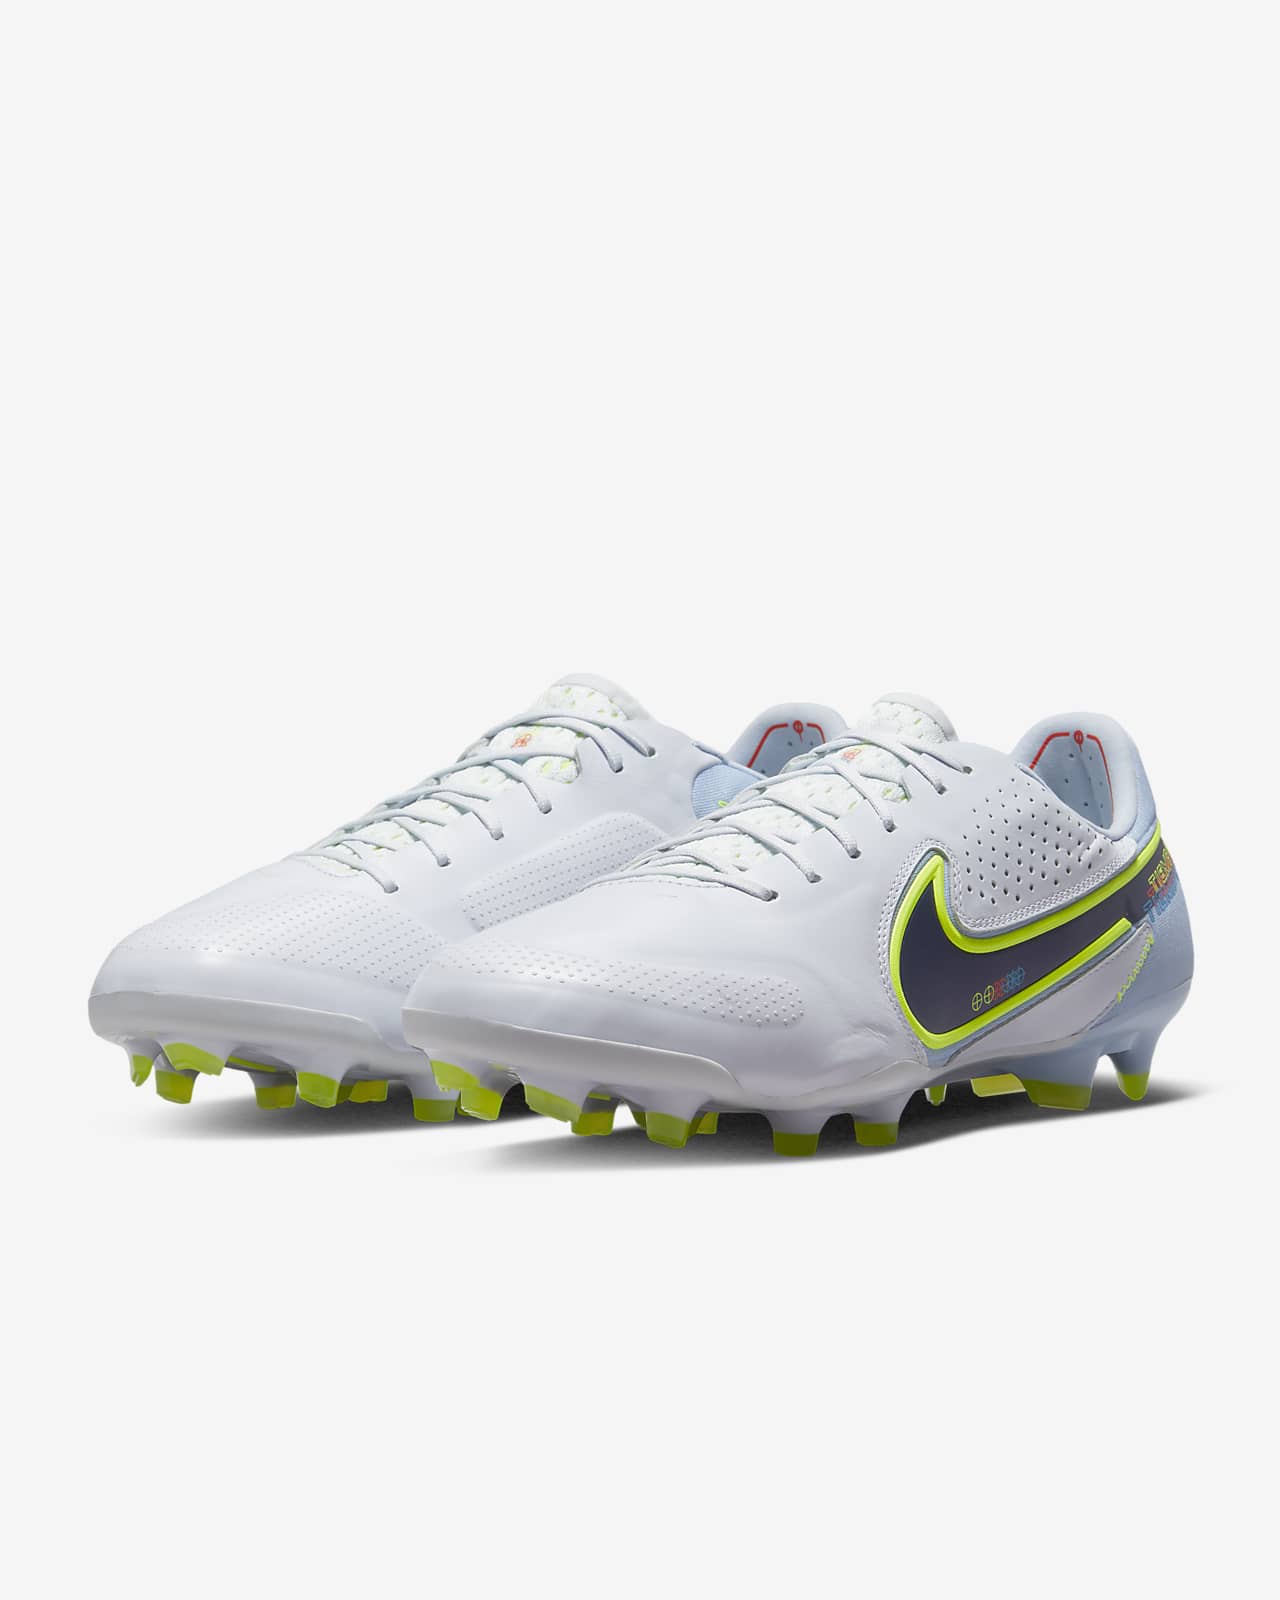 Cúal auditoría Gran cantidad Nike Tiempo Legend 9 Elite FG Firm-Ground Soccer Cleats. Nike.com